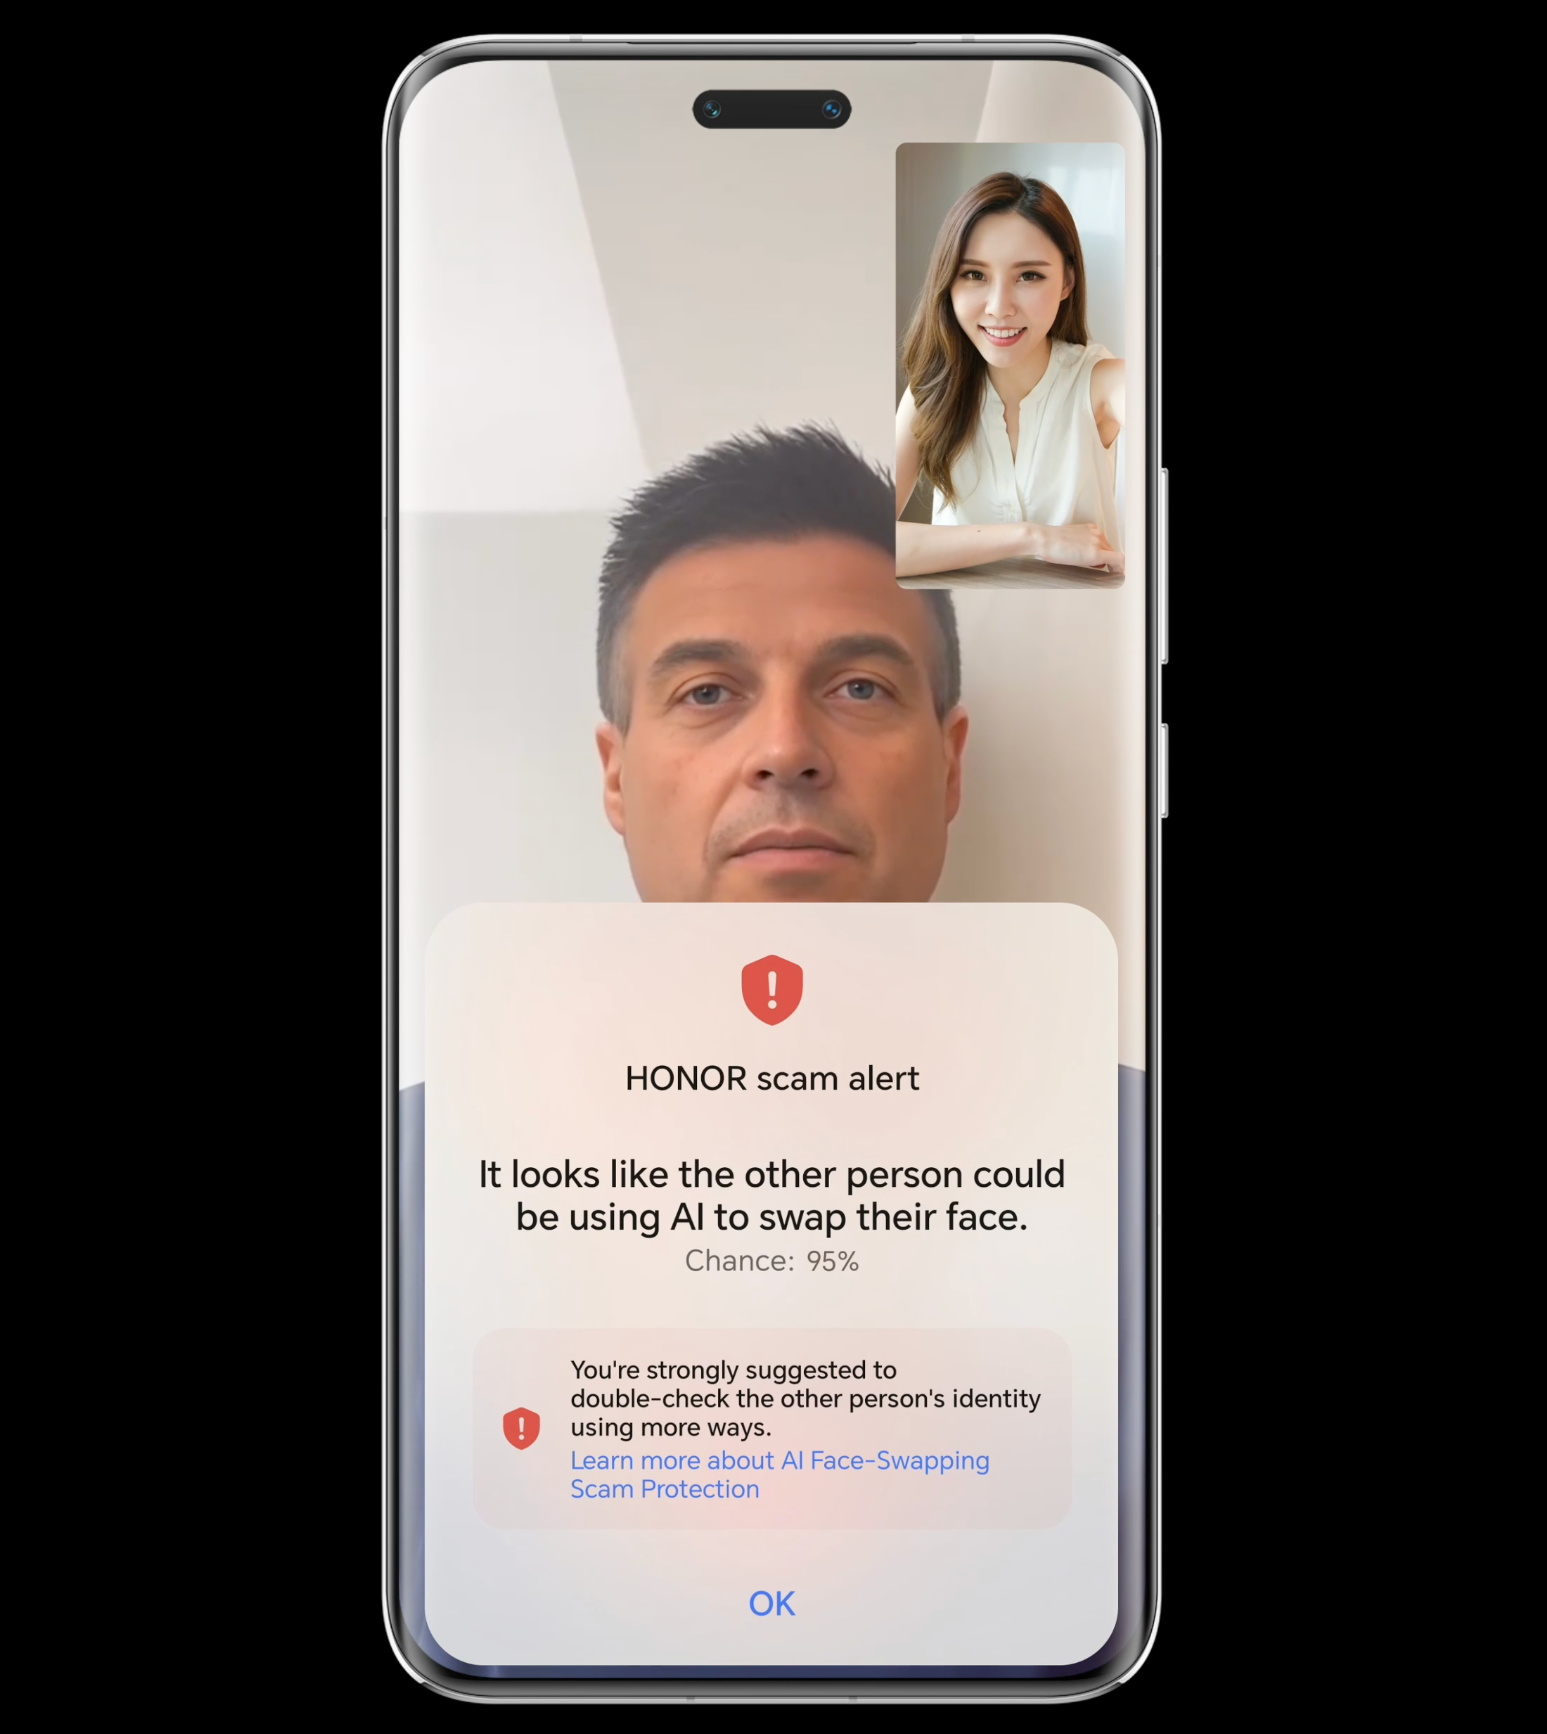 Image credit – Honor - Honor unveils AI features that see through deepfakes and keep your eyes healthy